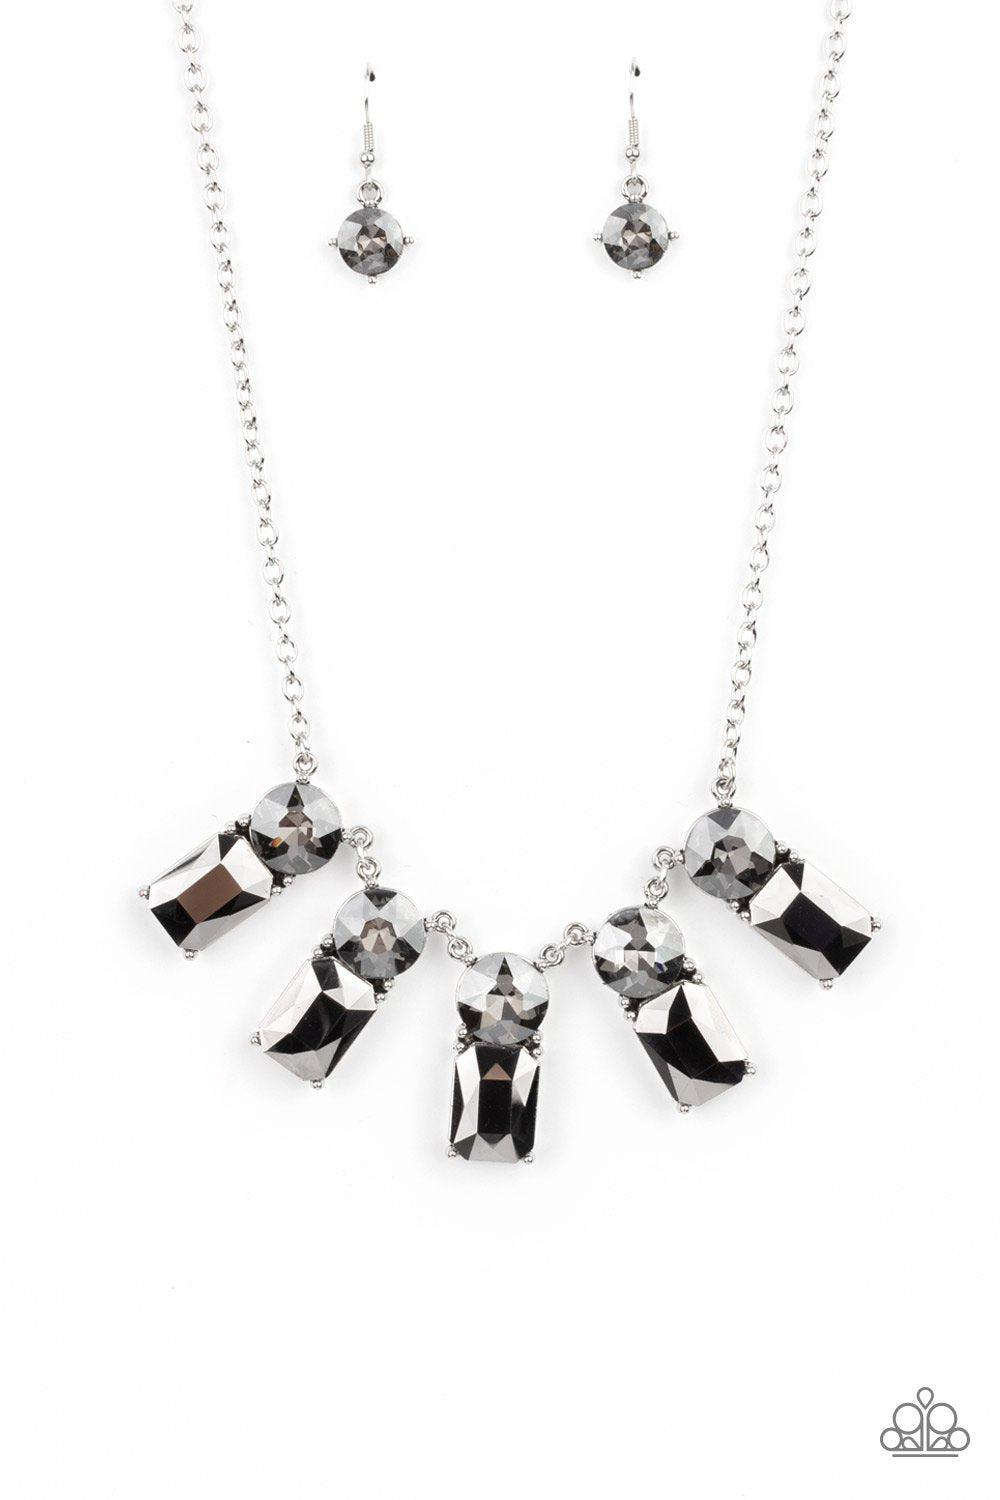 Celestial Royal Smoky Silver and Hematite Rhinestone Necklace - Paparazzi Accessories 2021 Convention Exclusive- lightbox - CarasShop.com - $5 Jewelry by Cara Jewels